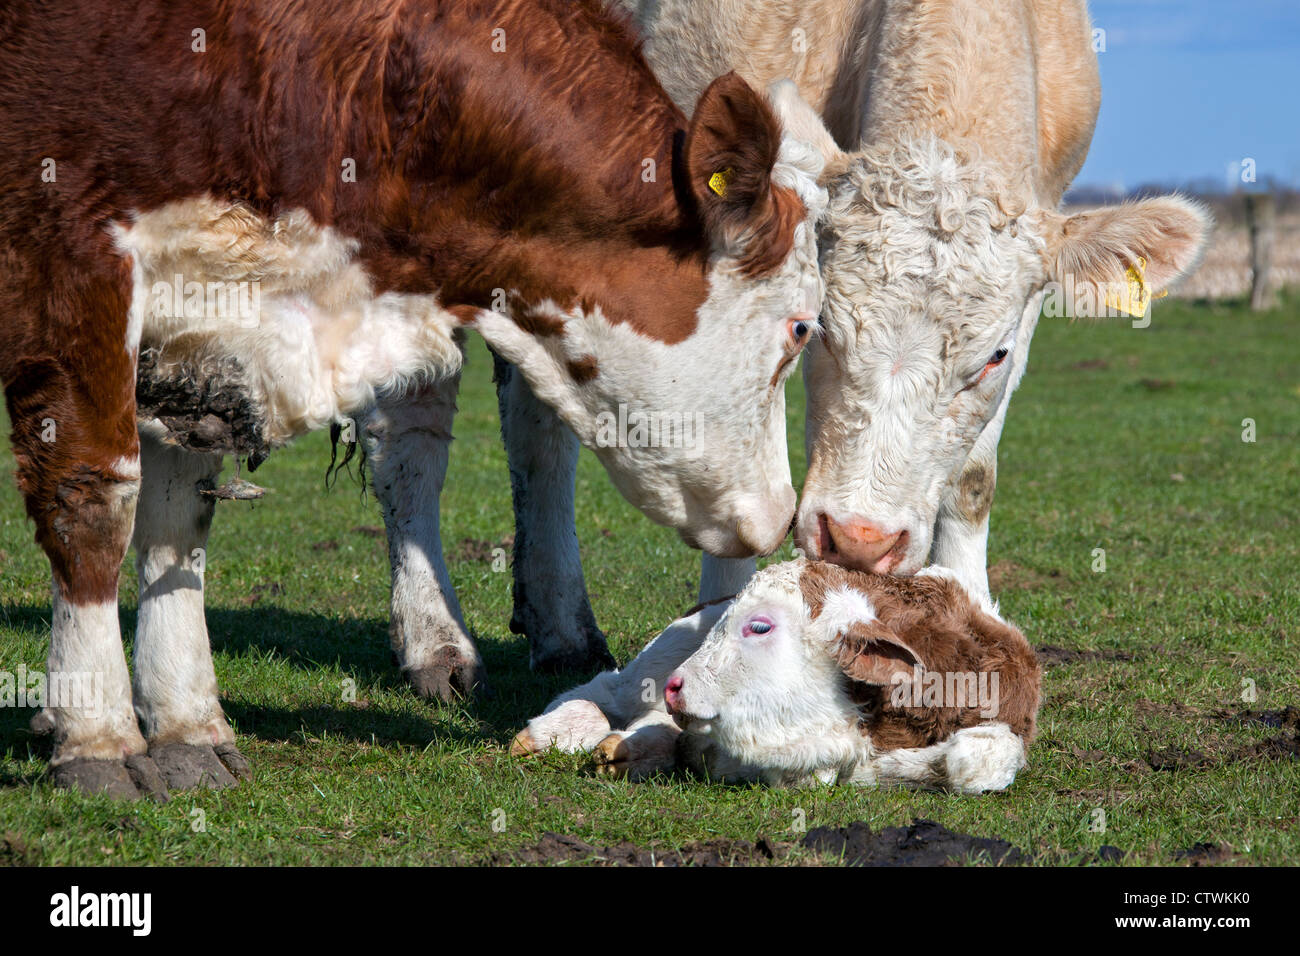 Curious cows (Bos taurus) sniffing at newborn calf in field, Germany Stock Photo